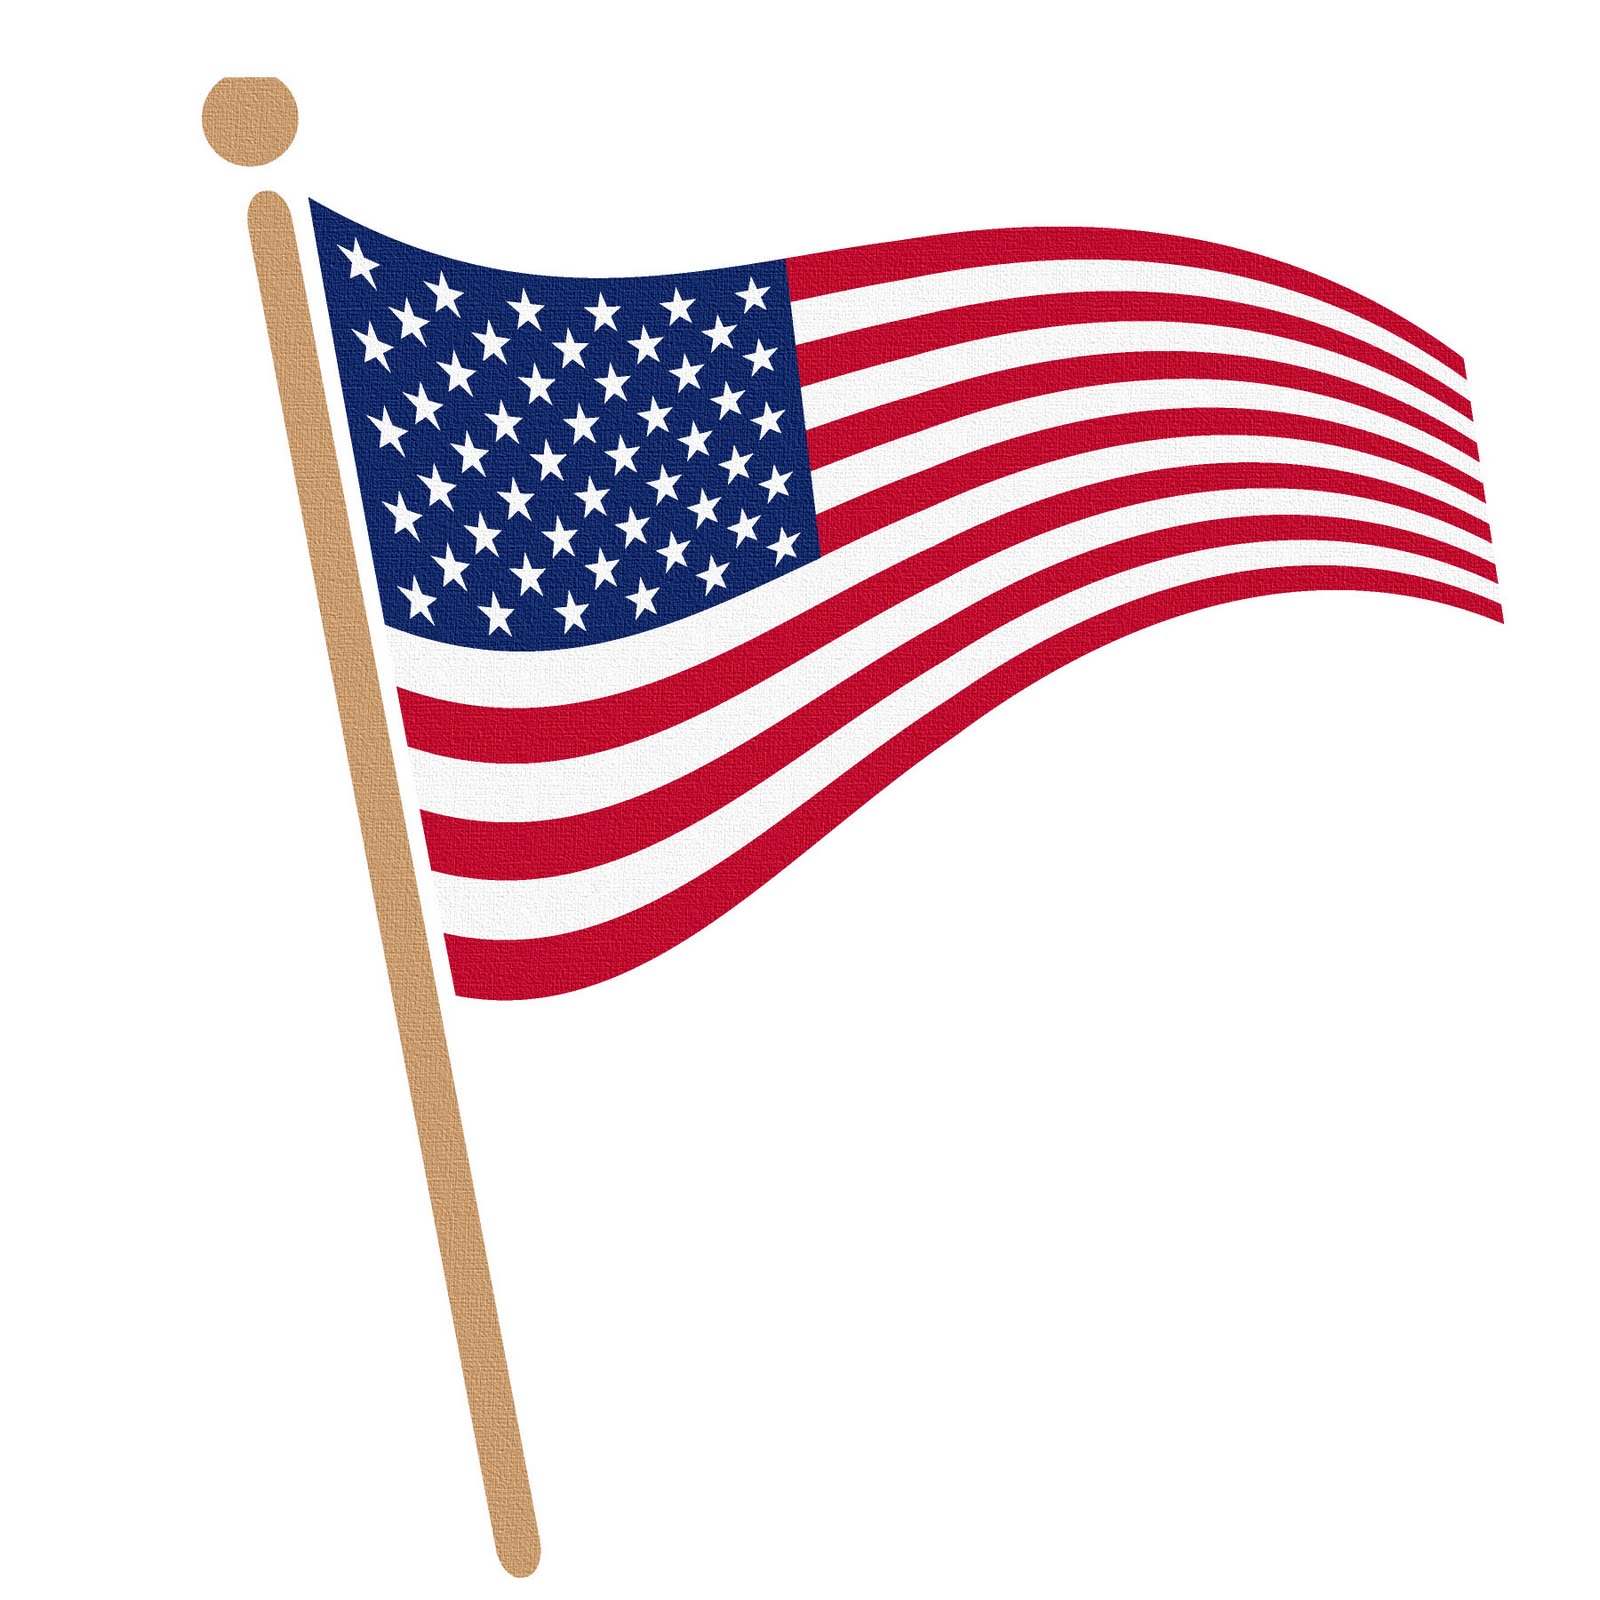 Free Flag Clipart - ClipArt Best